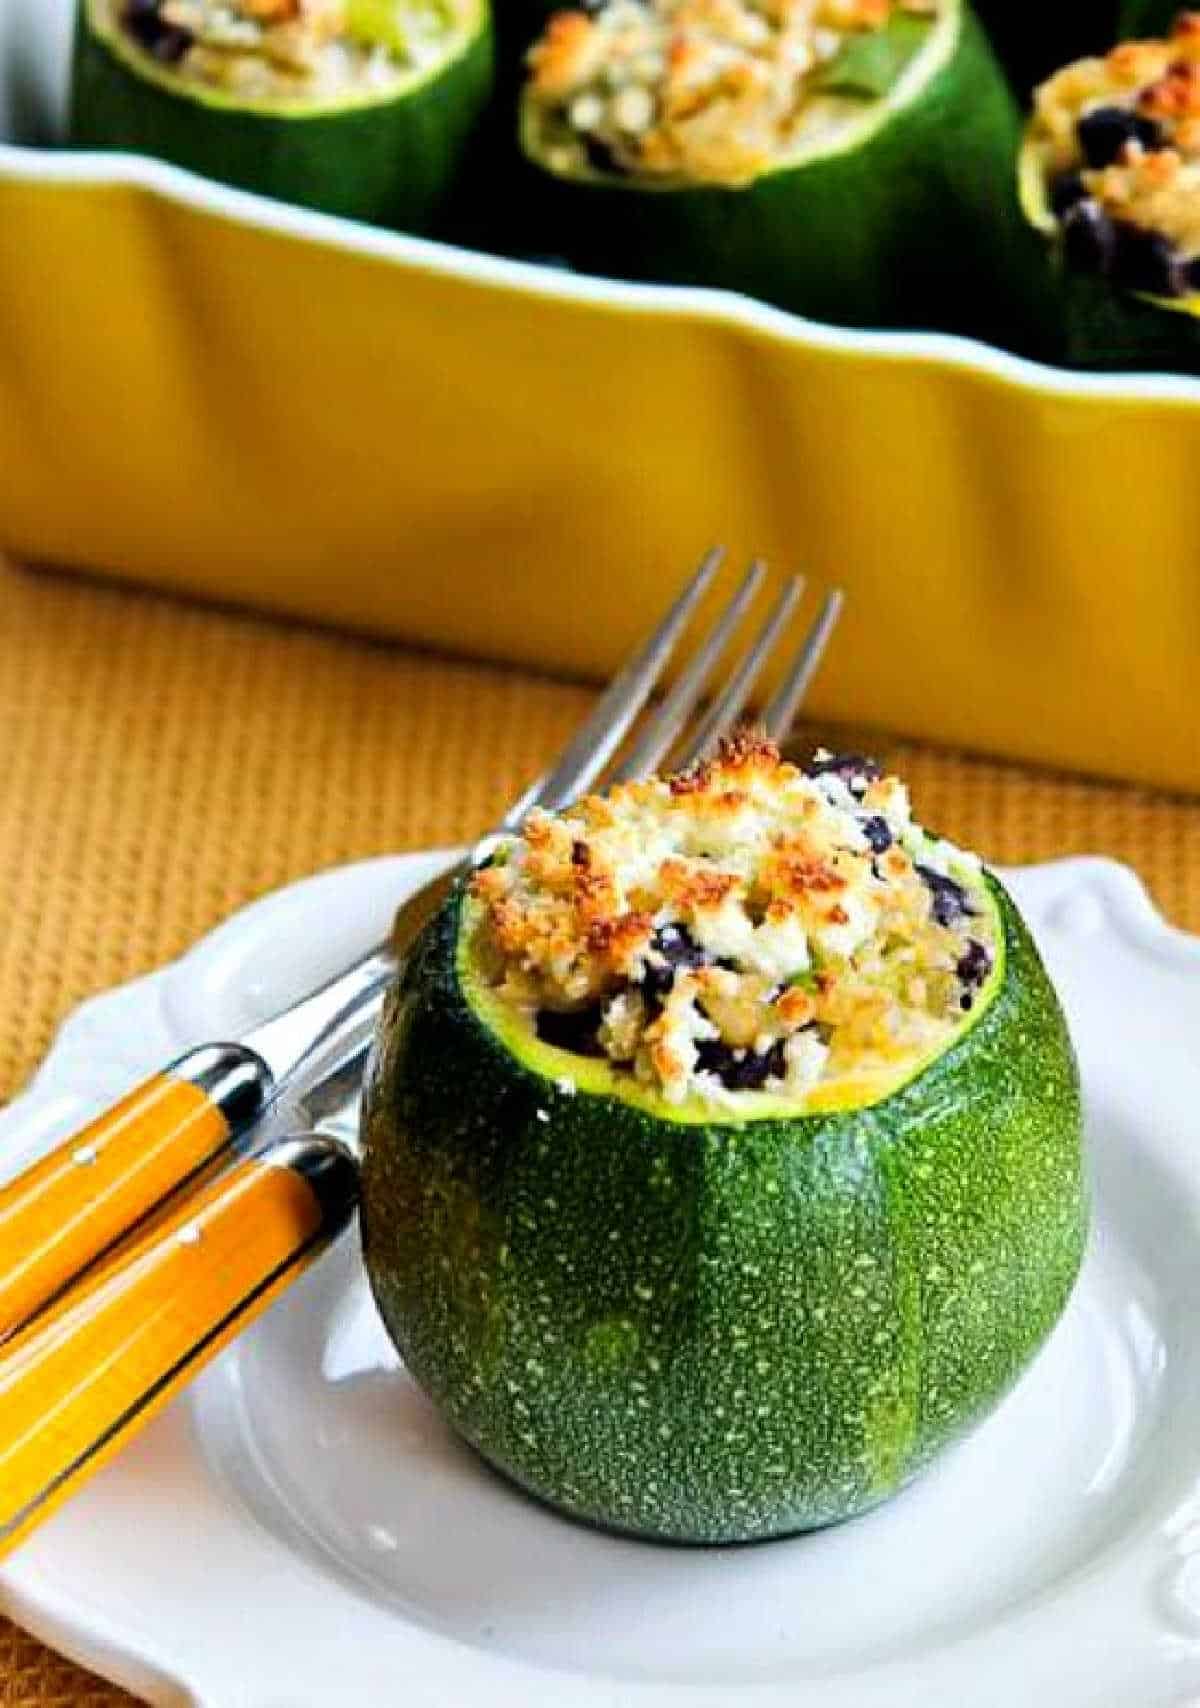 Vegetarian Stuffed Zucchini with one serving on plate and baking dish in background